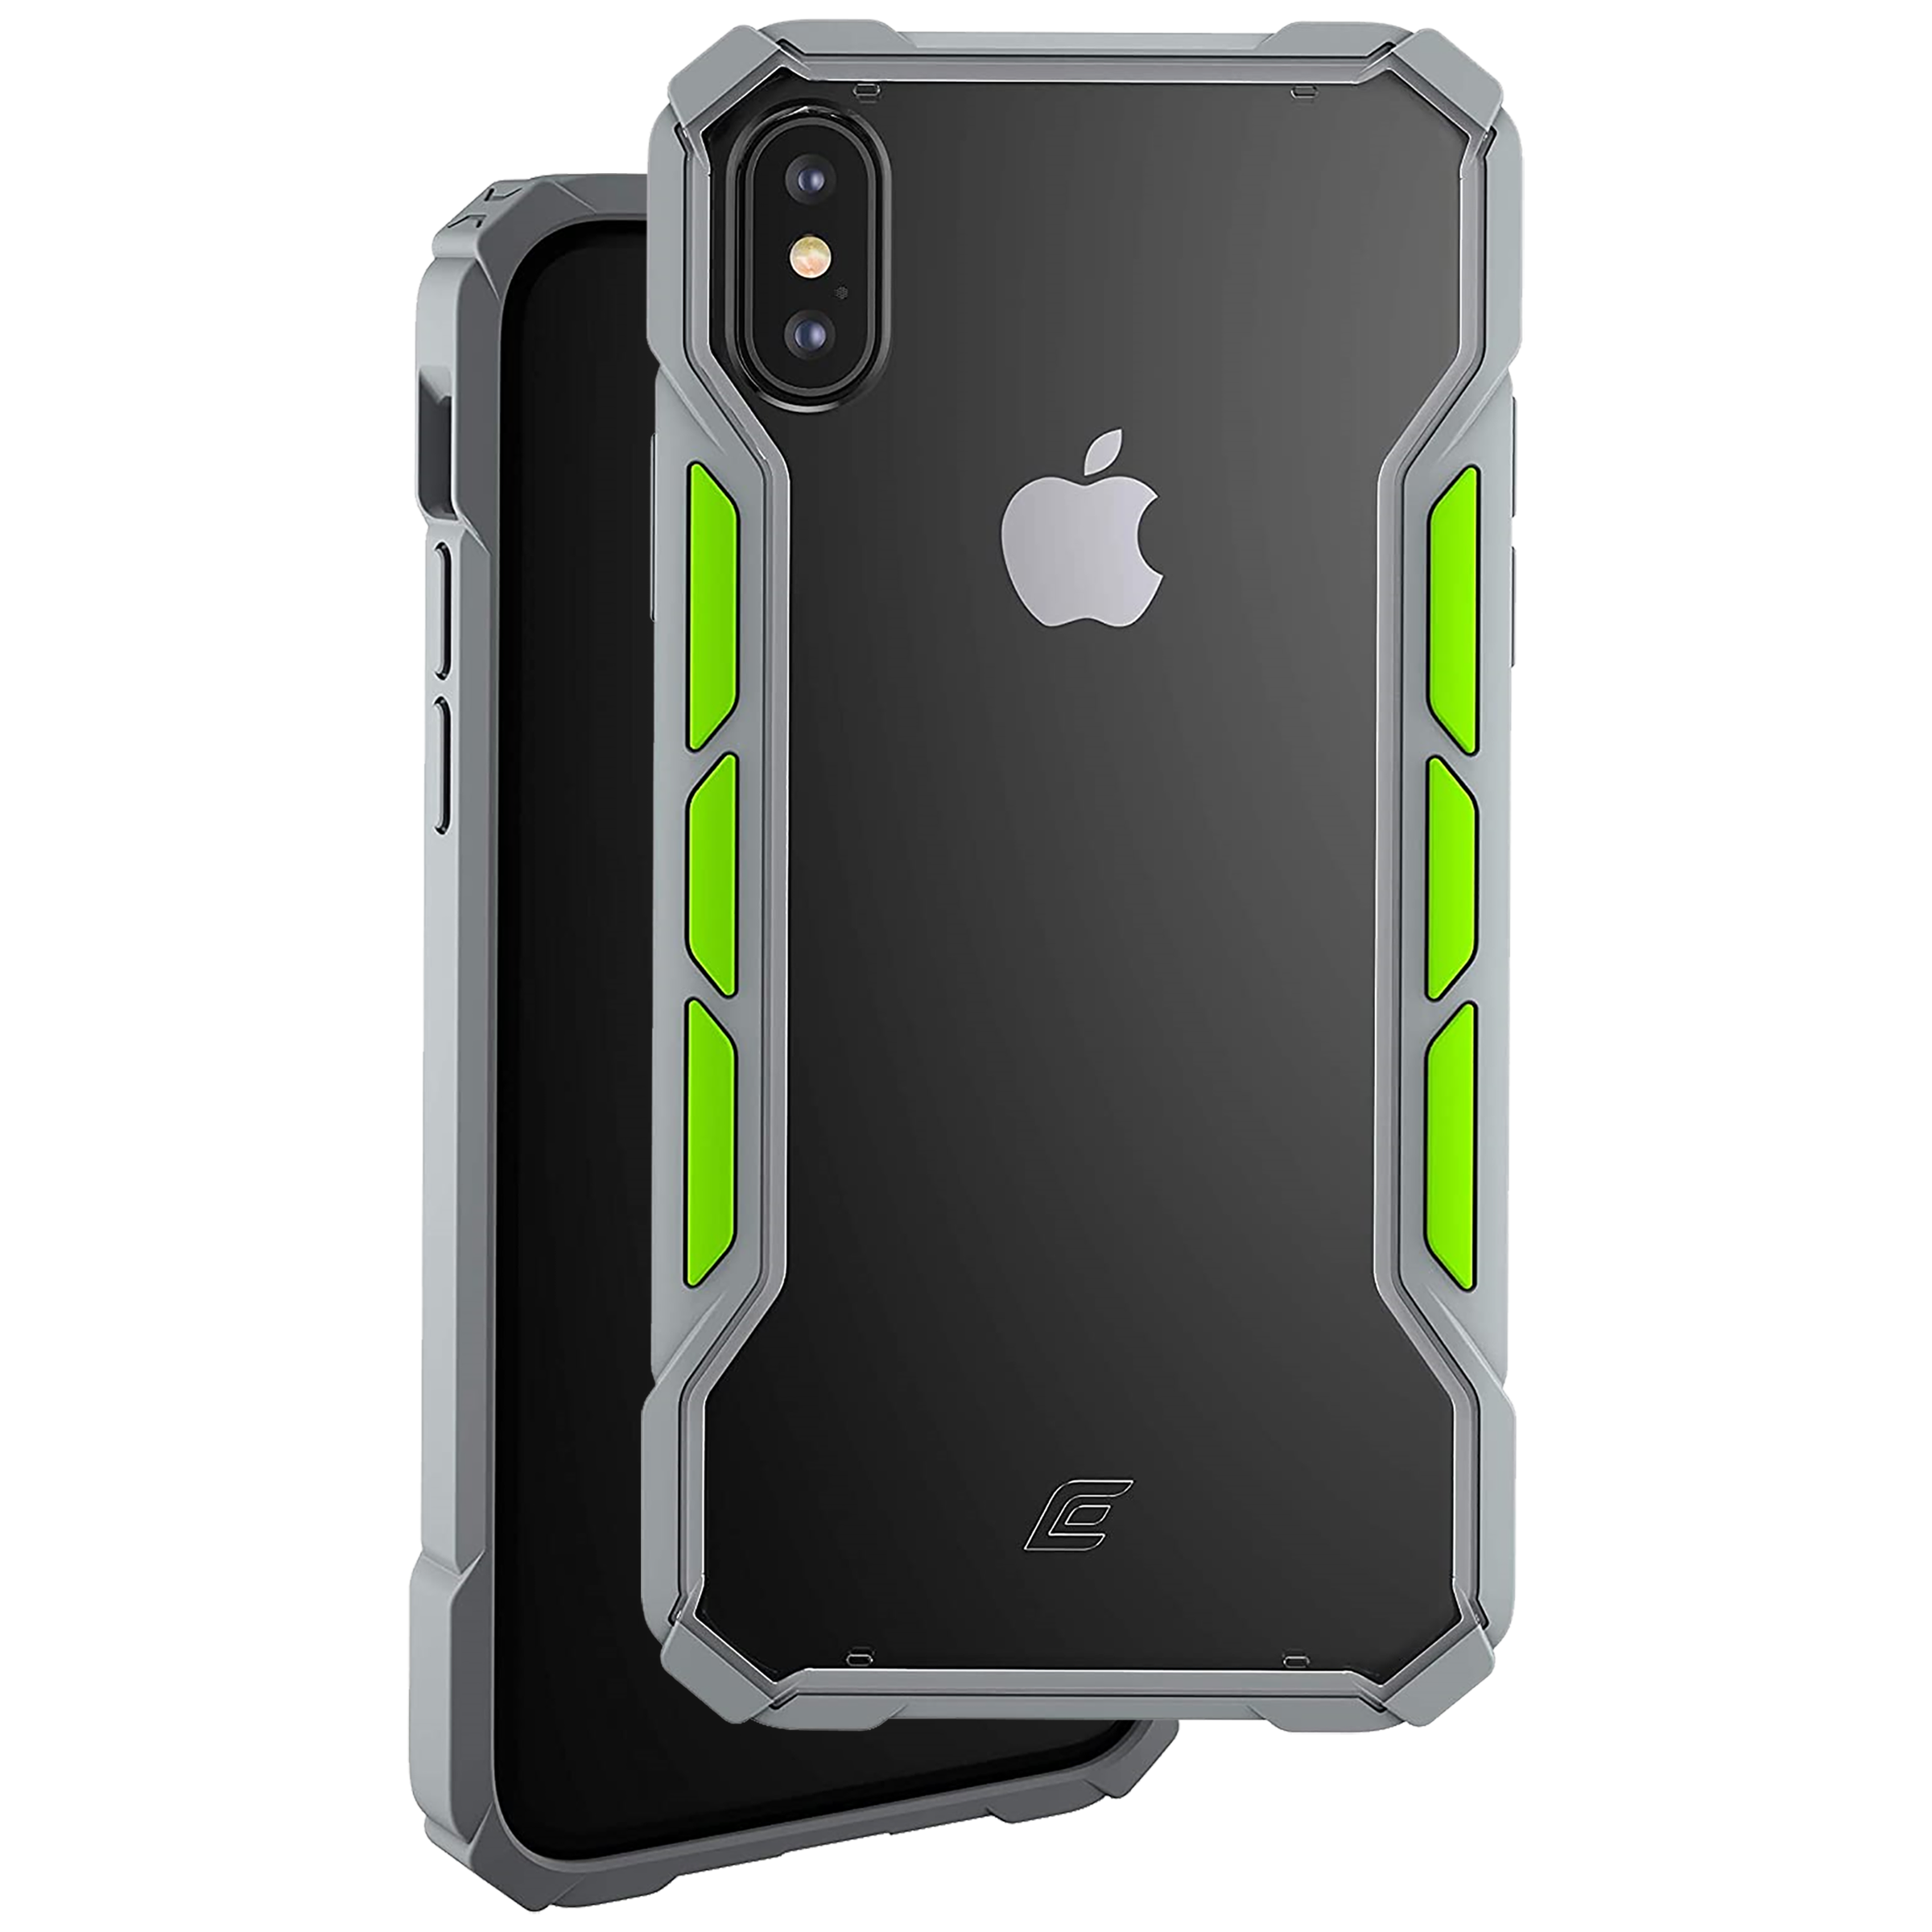 Element Case Rally Polycarbonate Back Case For iPhone XS Max (Mil-Spec Drop Protection, EMT-322-195E-04, Light Grey/Lime)_1